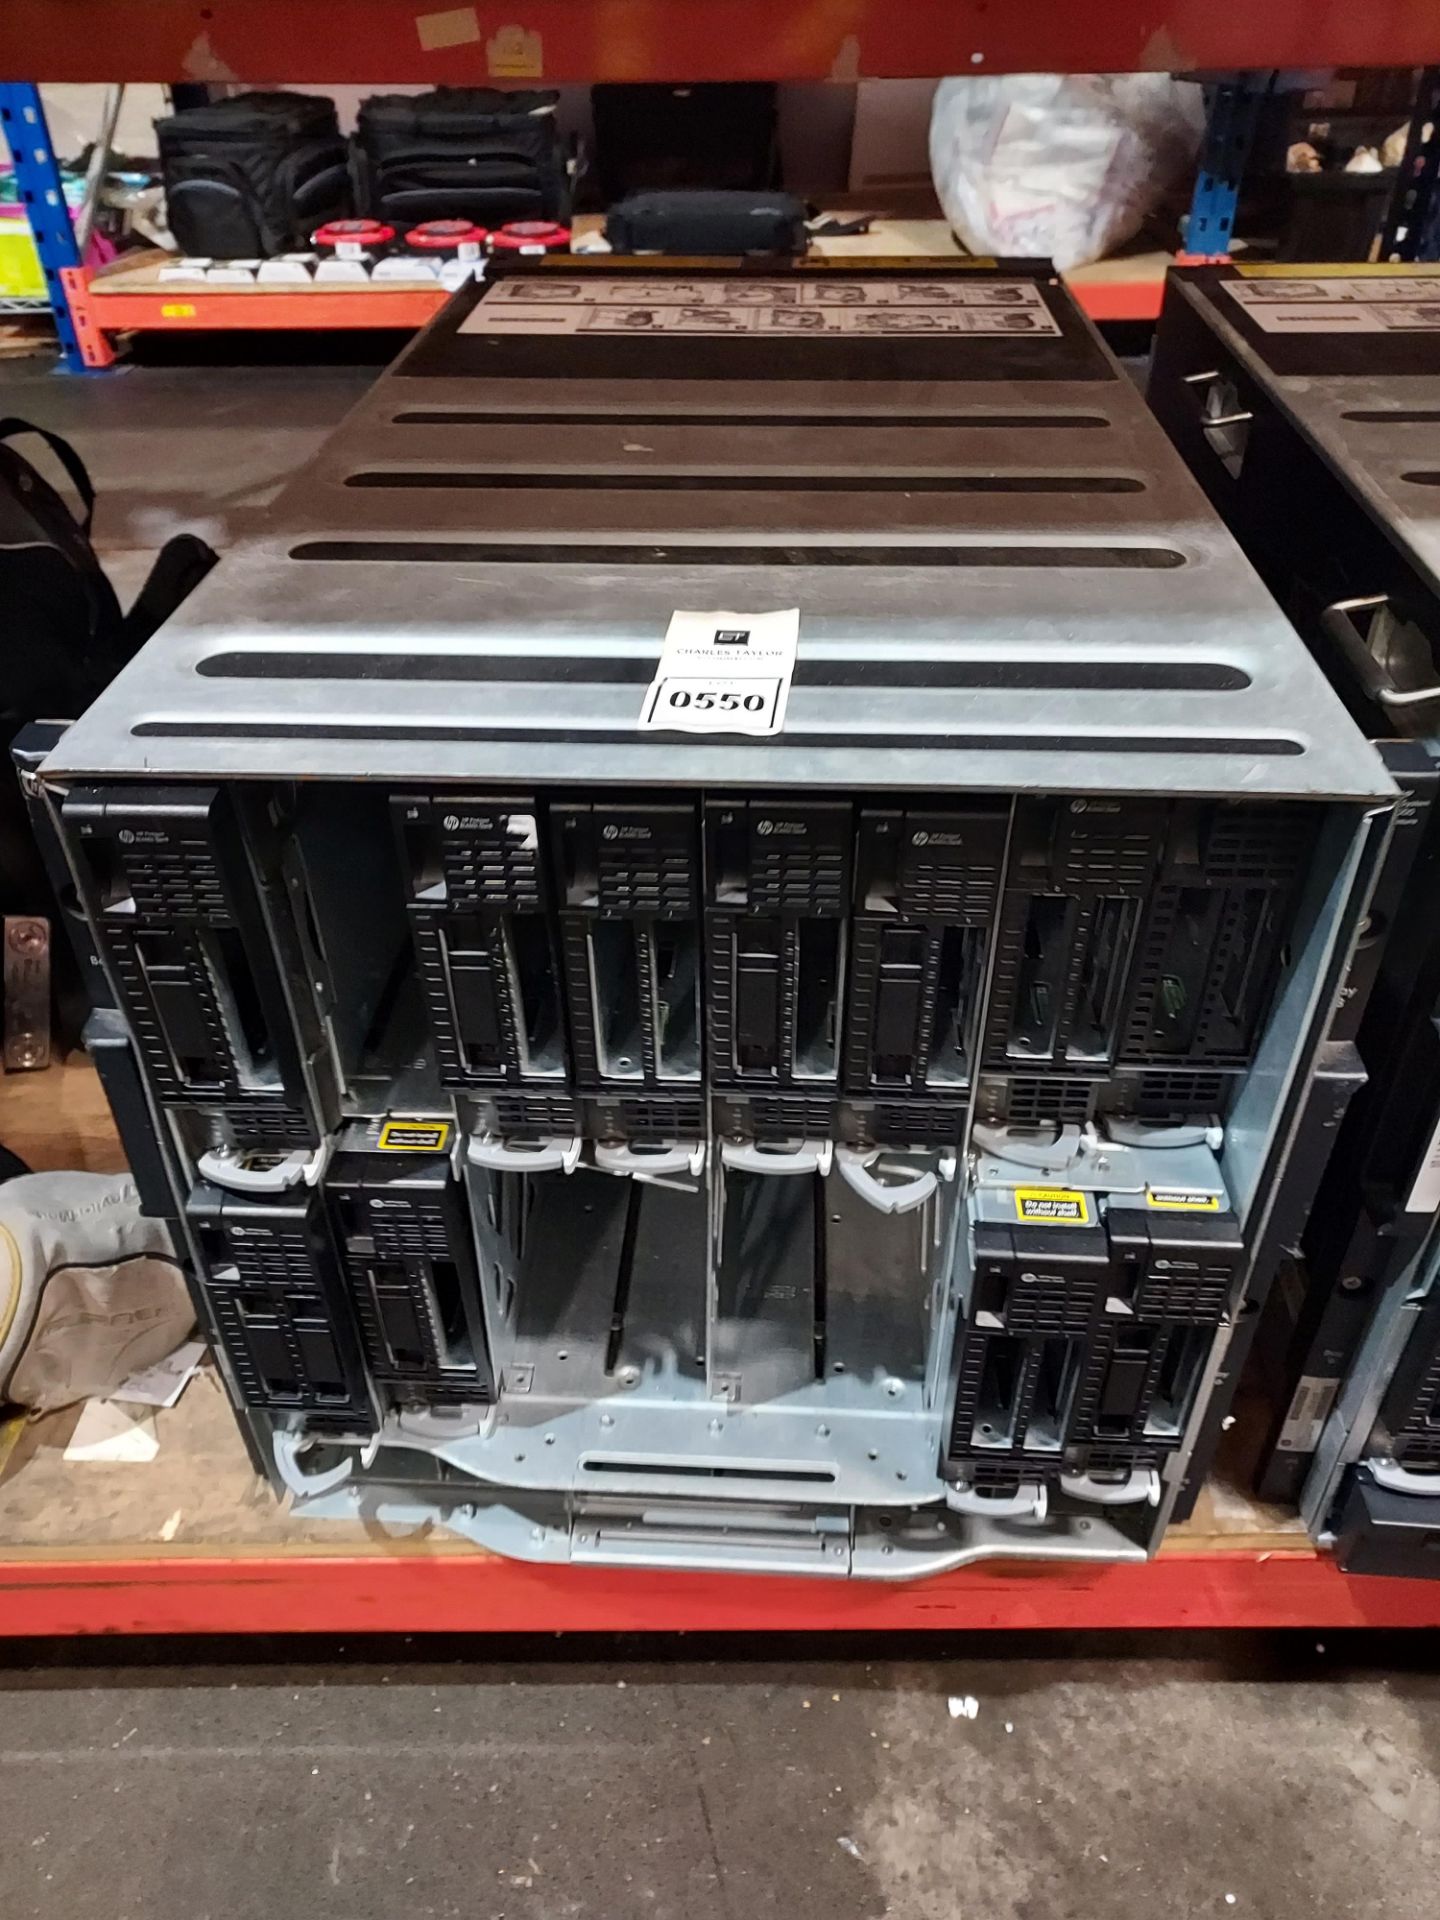 1 X HP BLADESYSTEM C7000 CHASSIS ENCLOSURE